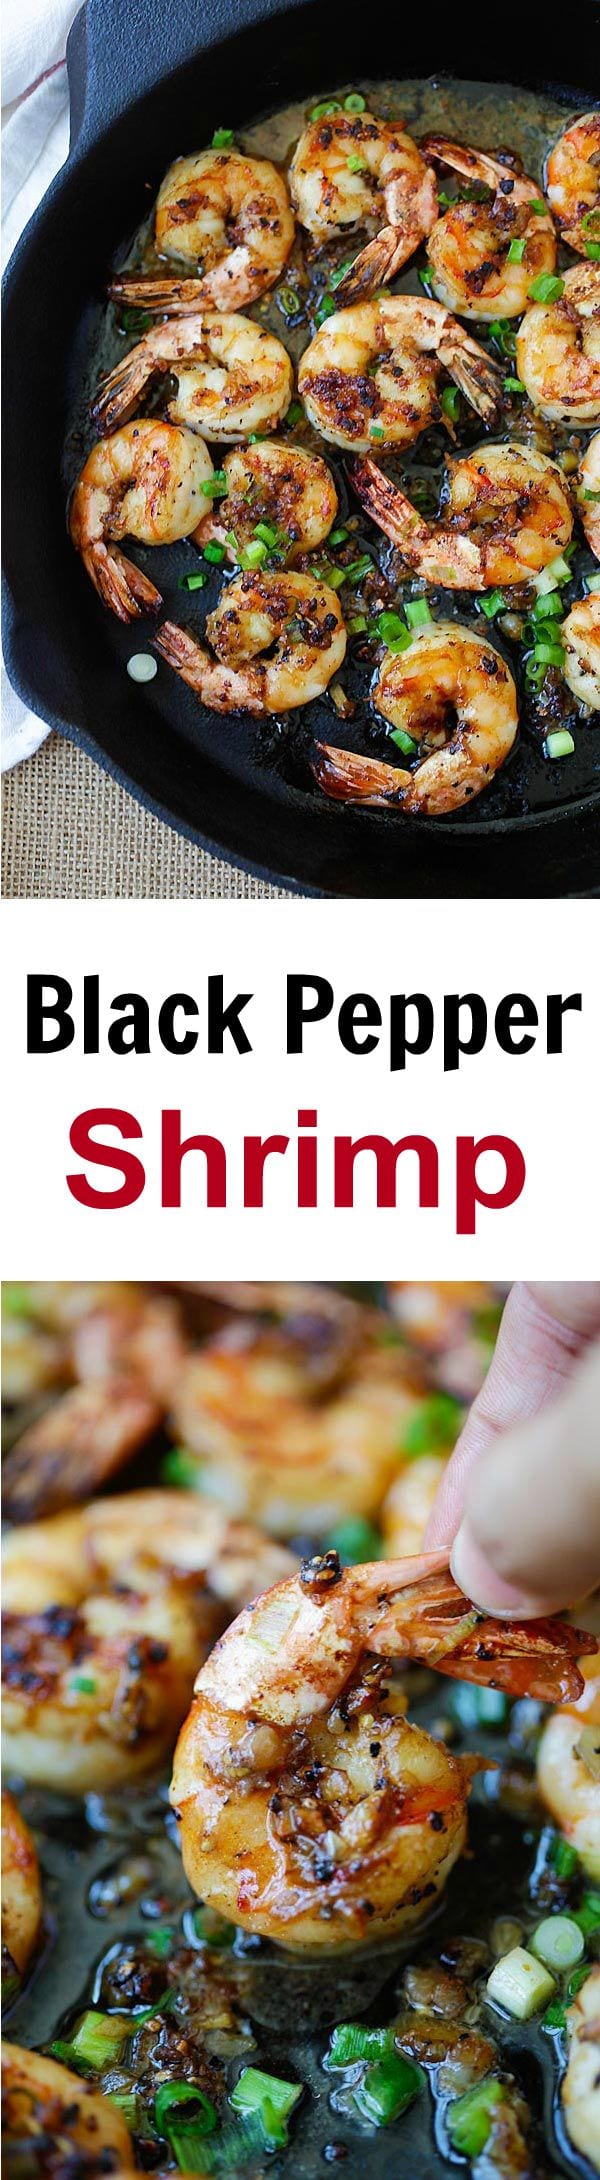 Black pepper shrimp – garlicky and buttery shrimp in a savory black pepper sauce. An easy recipe that takes 20 minutes, so delicious! | rasamalaysia.com